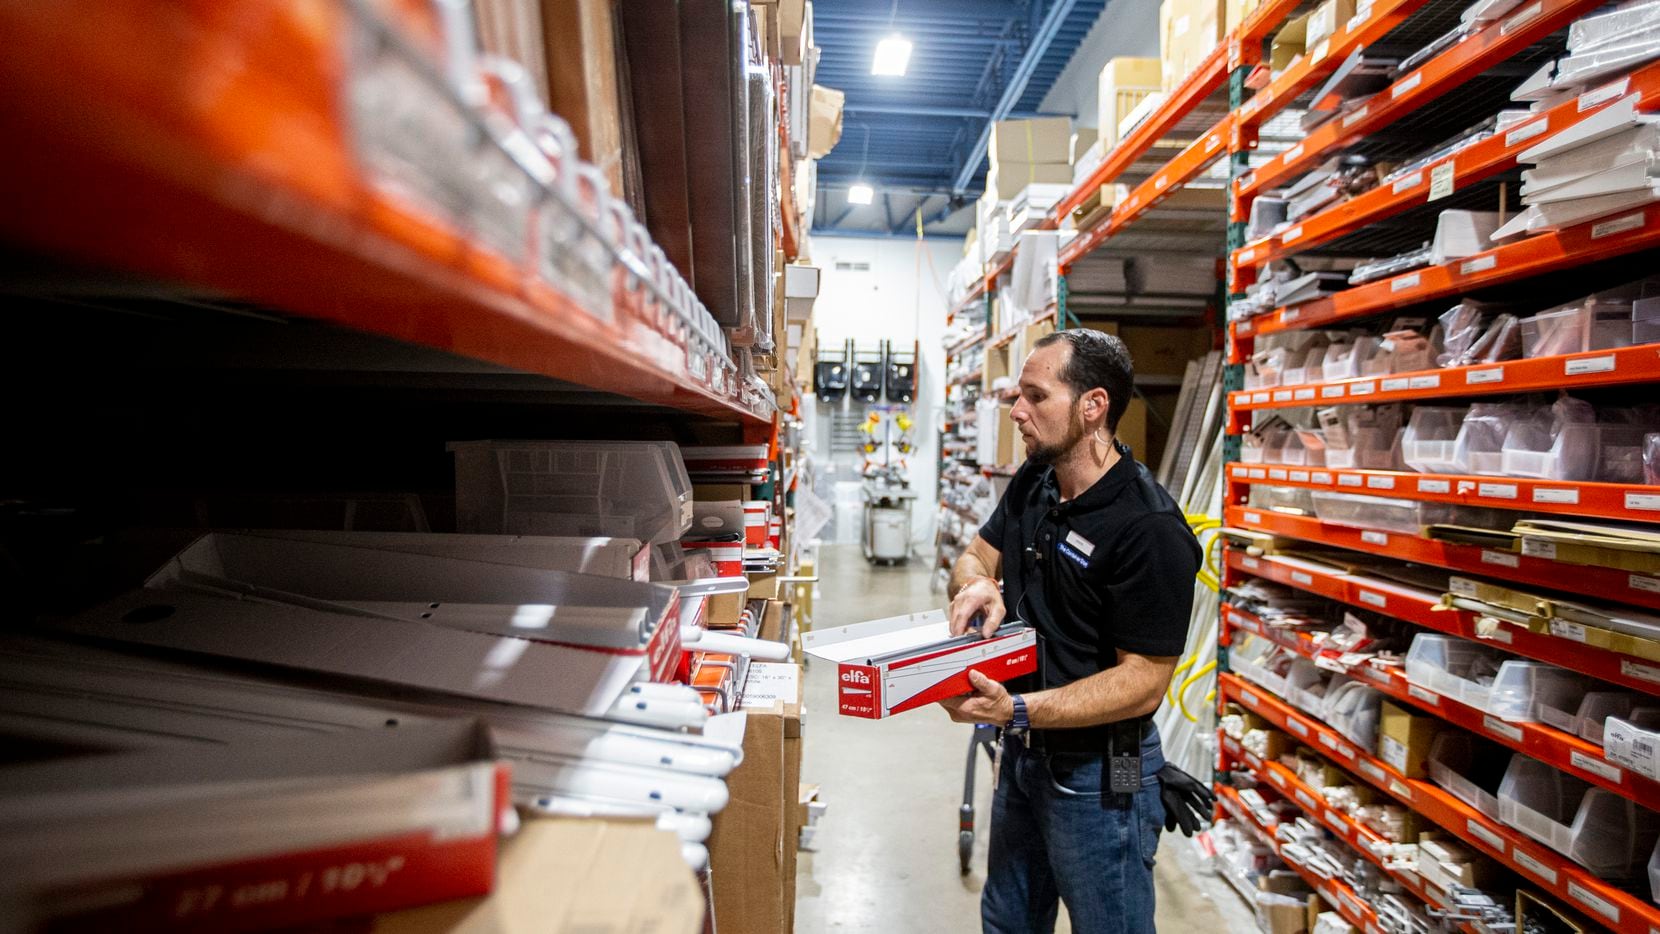 Jason Burchfield, an employee with The Container Store, worked in the stockroom at a store...